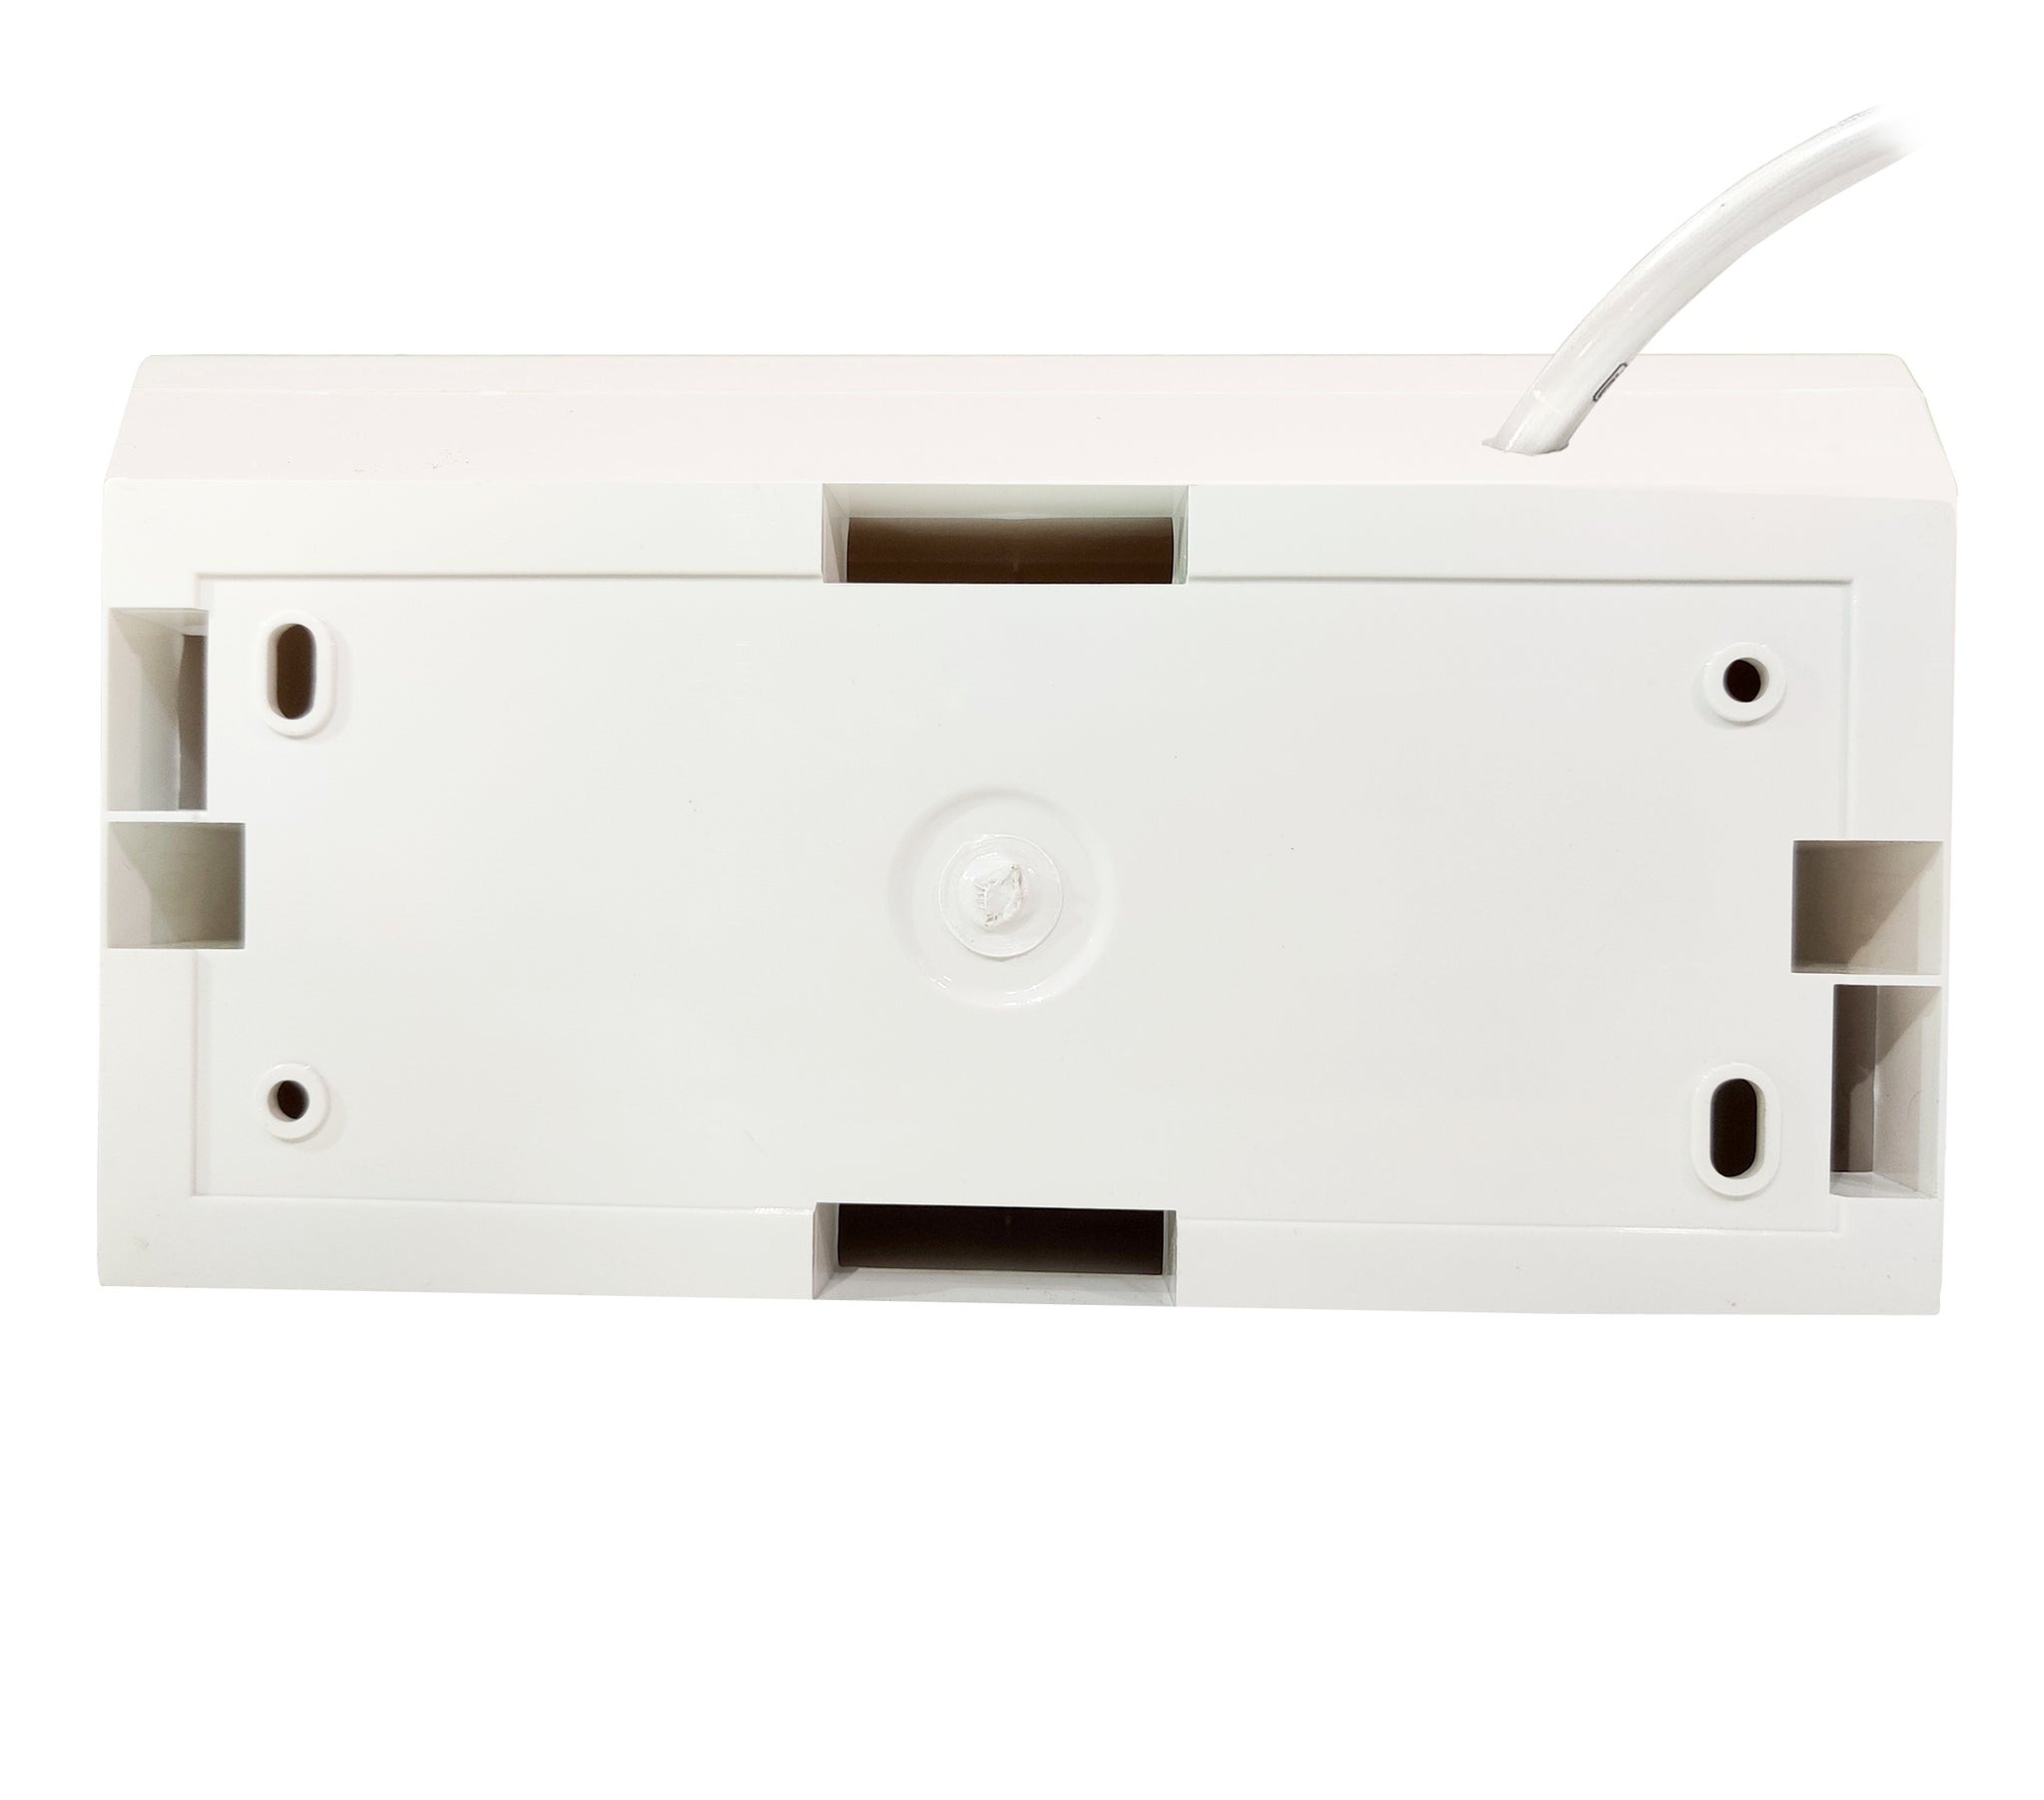 Palfrey Electric Extension Board - 5A + 5A + 1 Universal Two Pin Socket with Master Switch and Heavy Duty Wire (White)